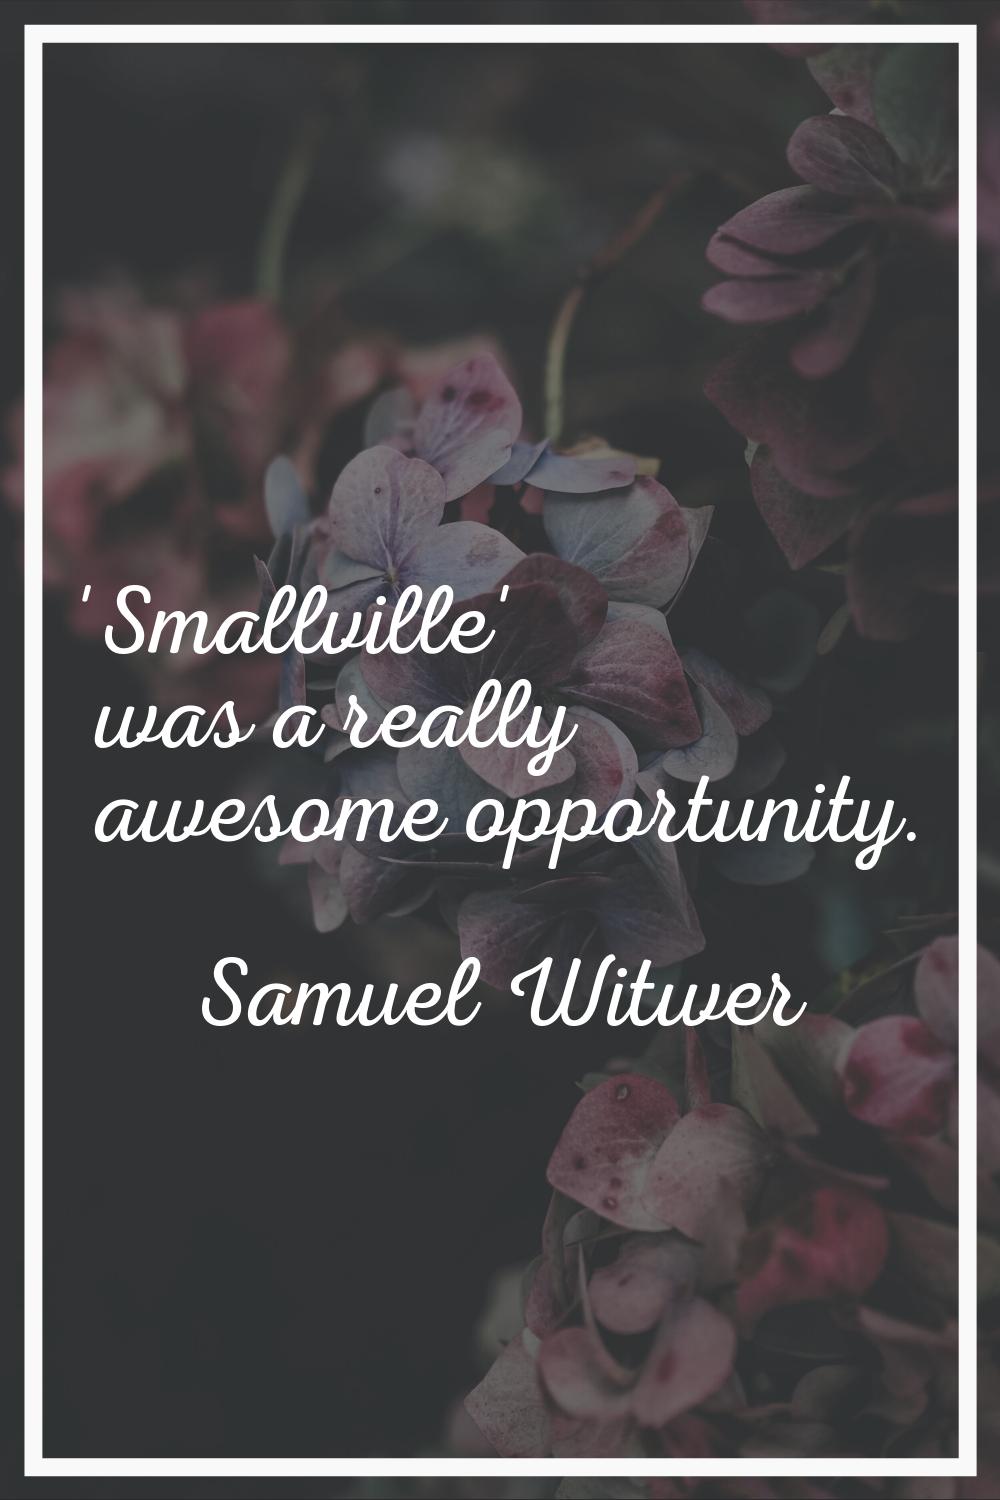 'Smallville' was a really awesome opportunity.